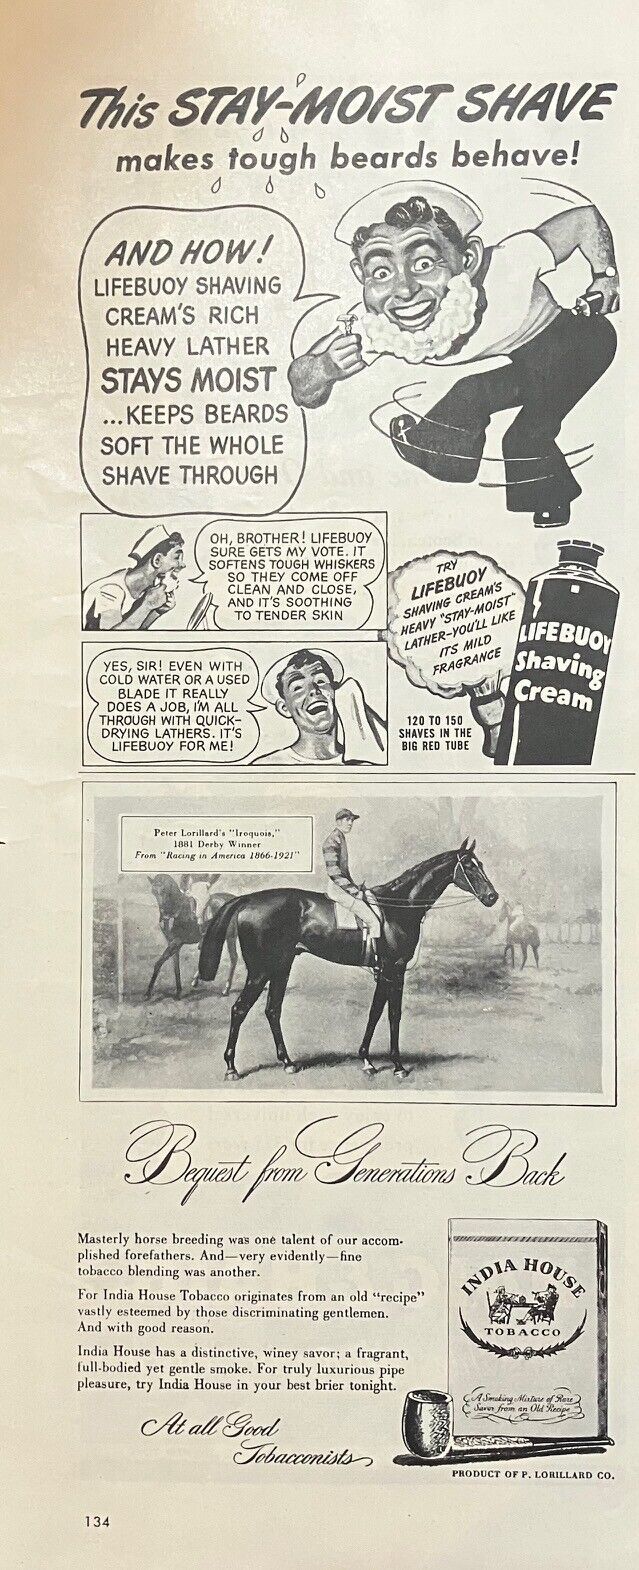 Rare 1940s Vintage Original Tobacco Kentucky Derby Iroquois Horse Racing AD Wow